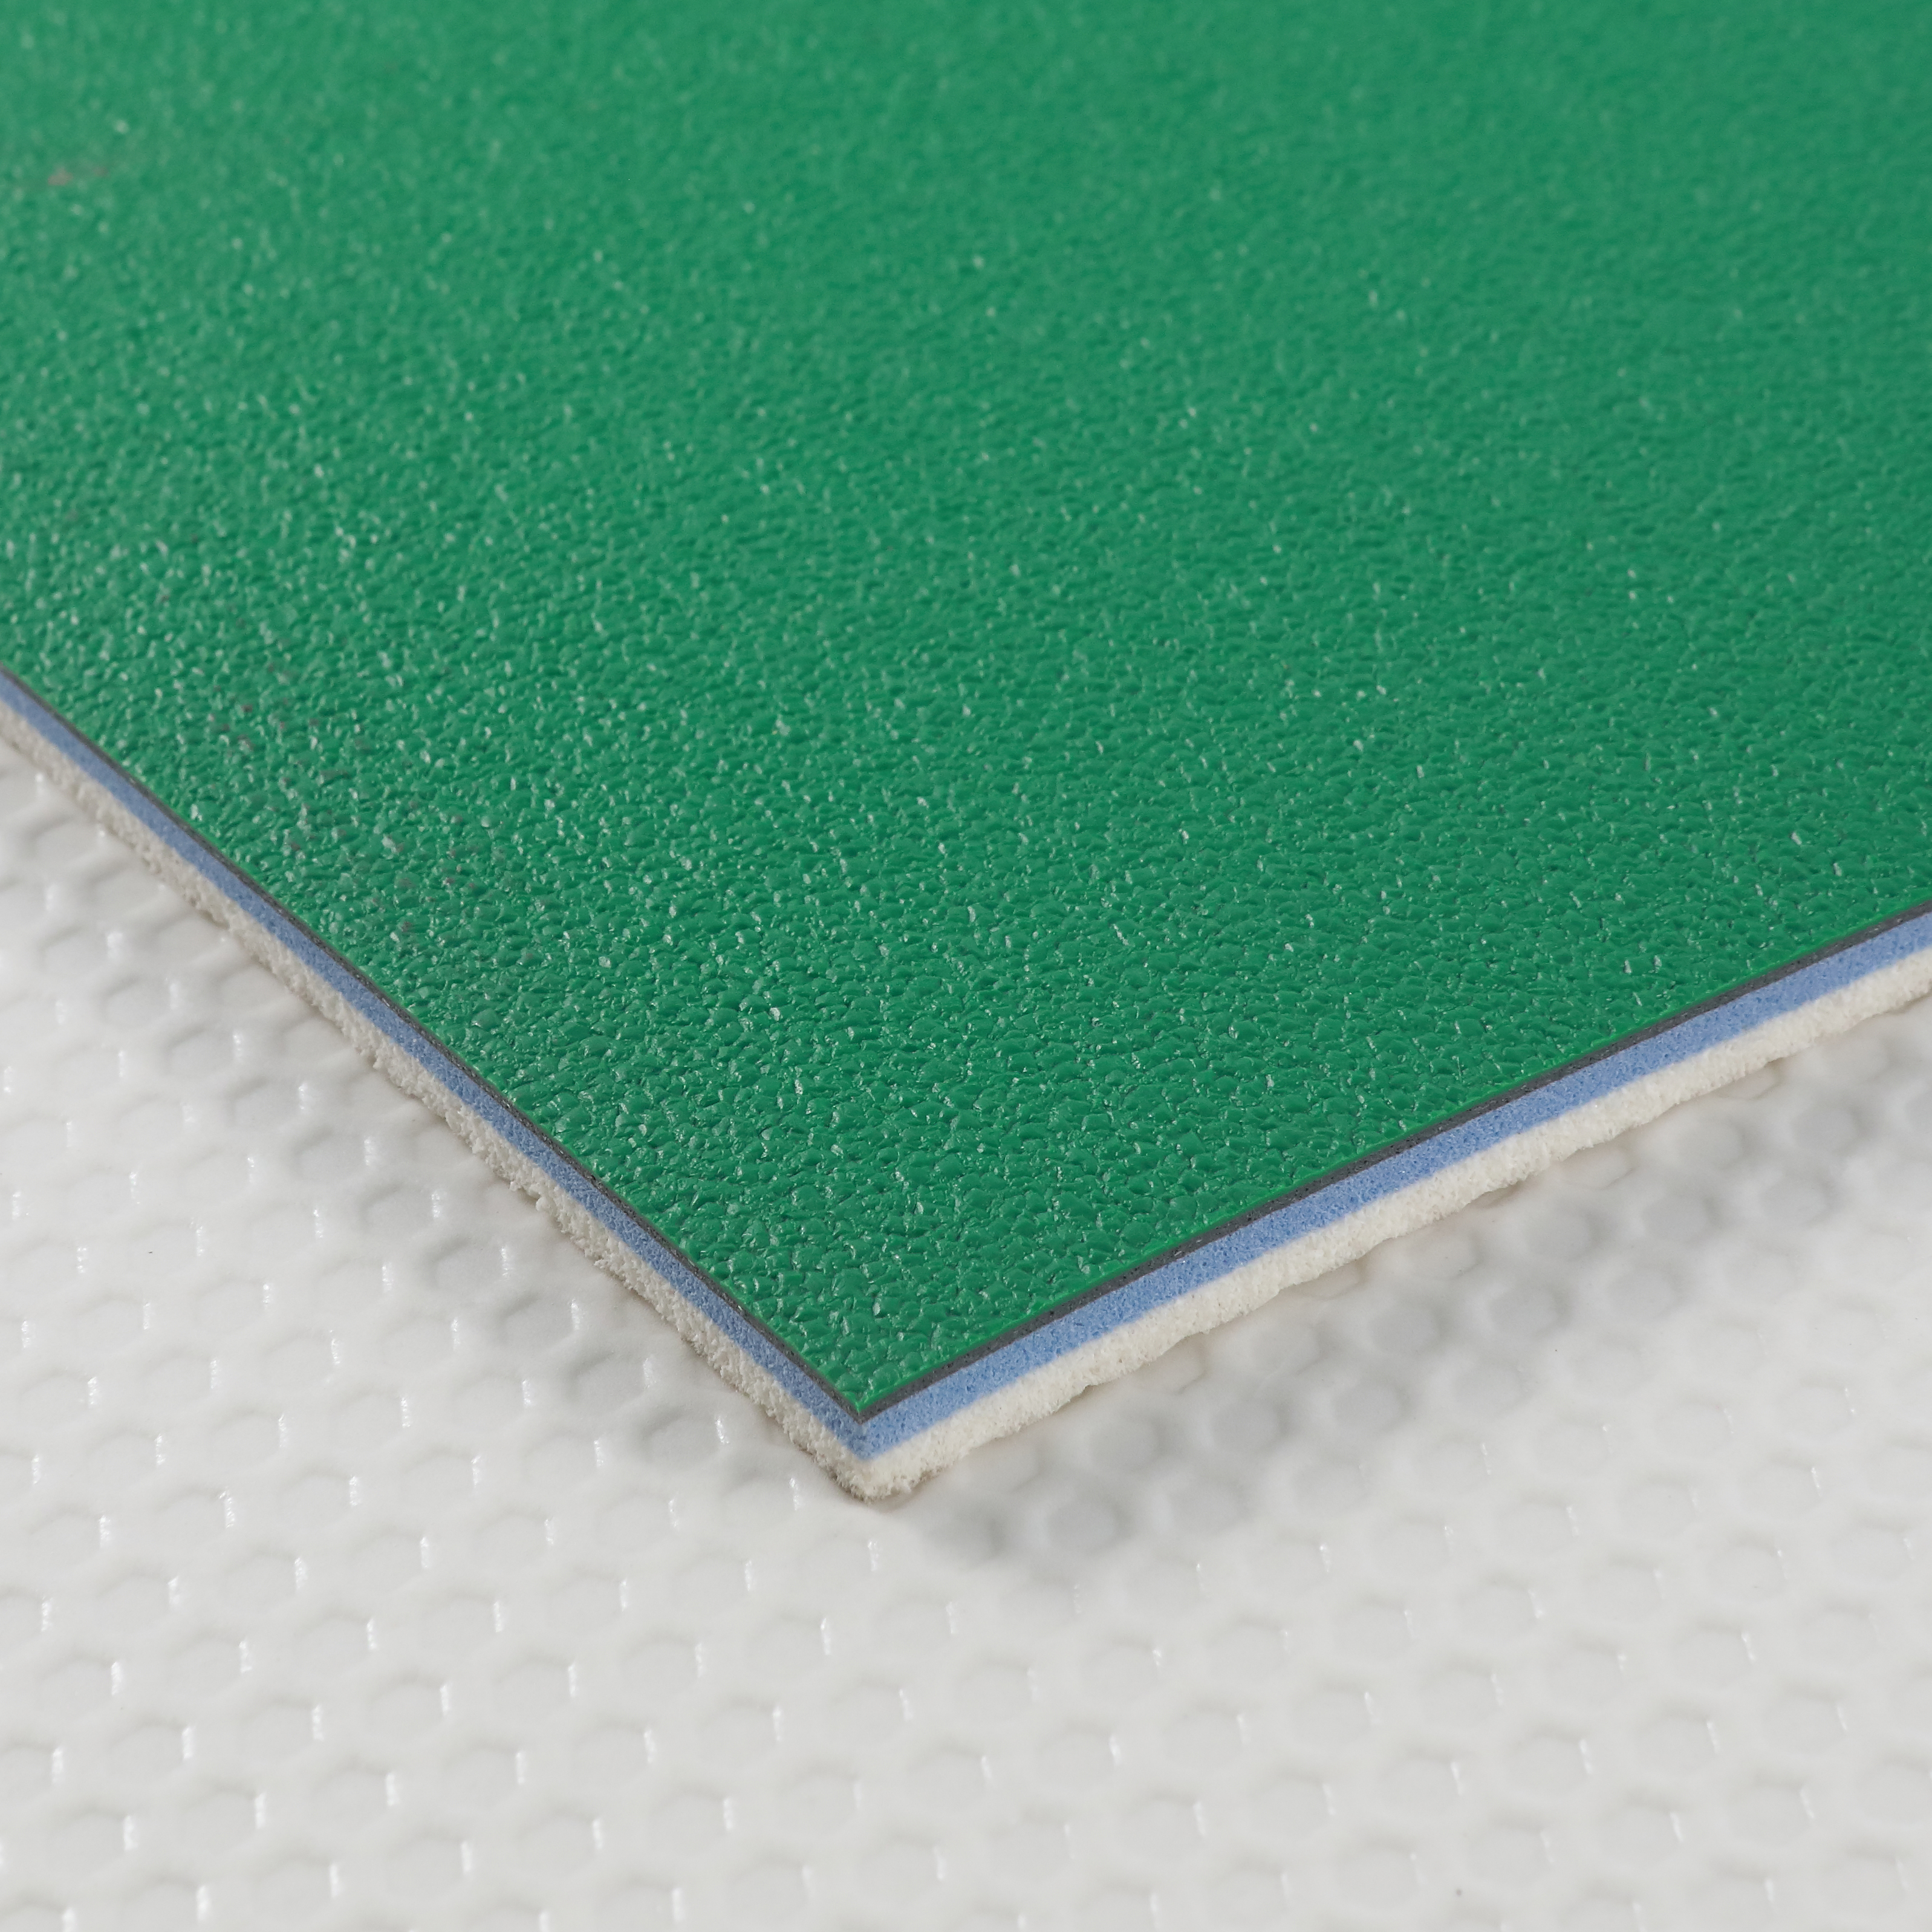 Sound Proof Sports PVC Flooring For Gym